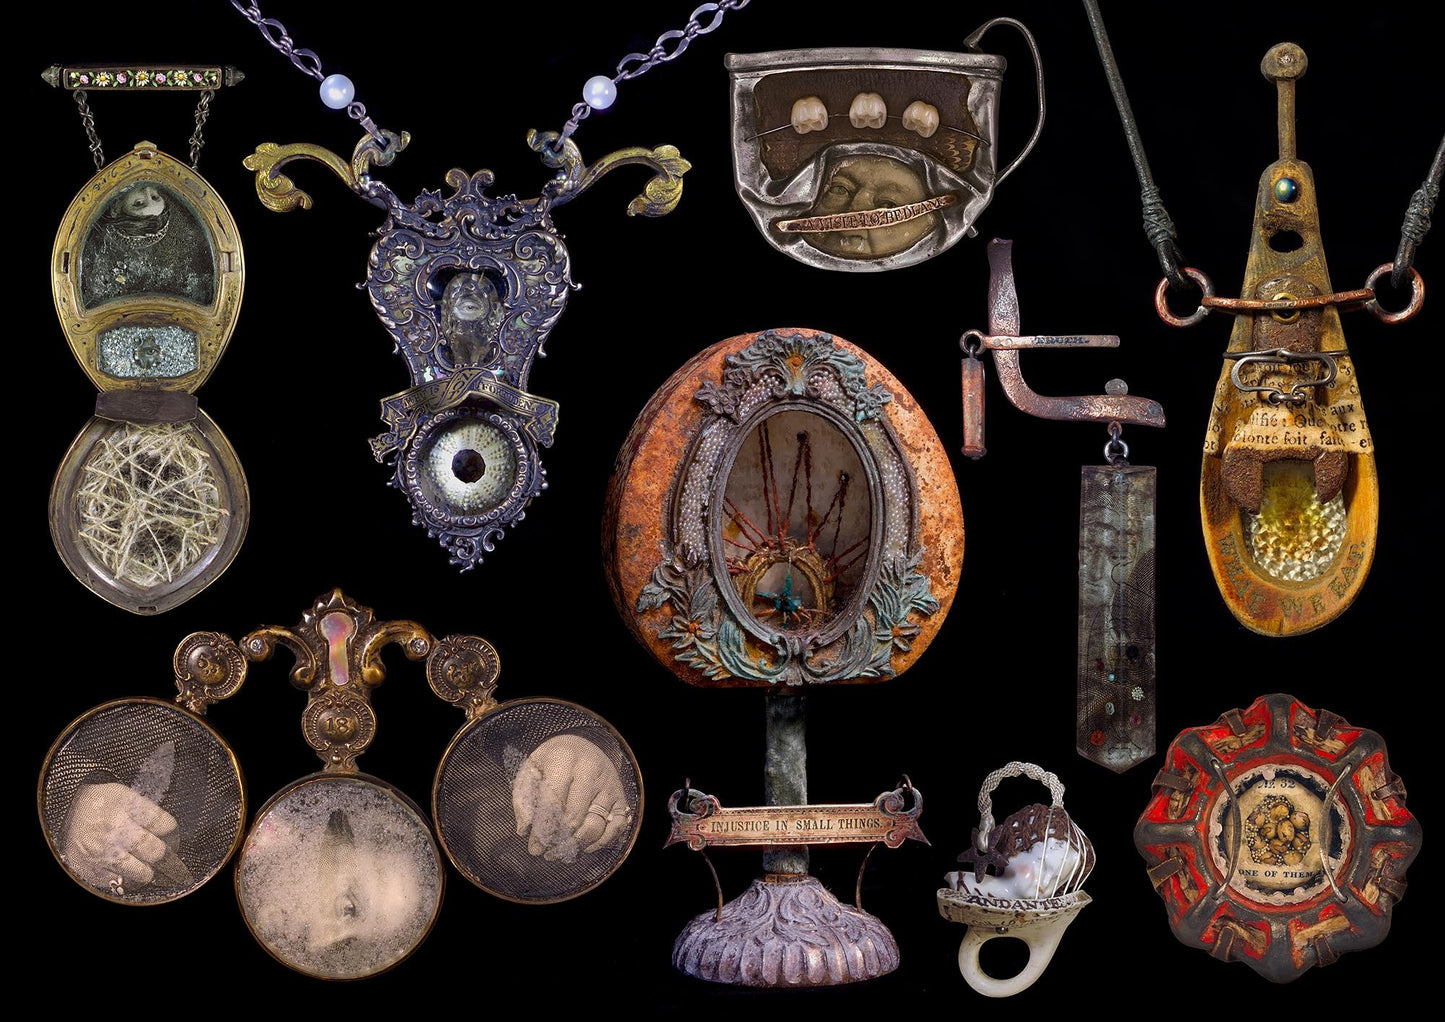 Precious Little: The Poetry of Found Objects with Keith Lo Bue